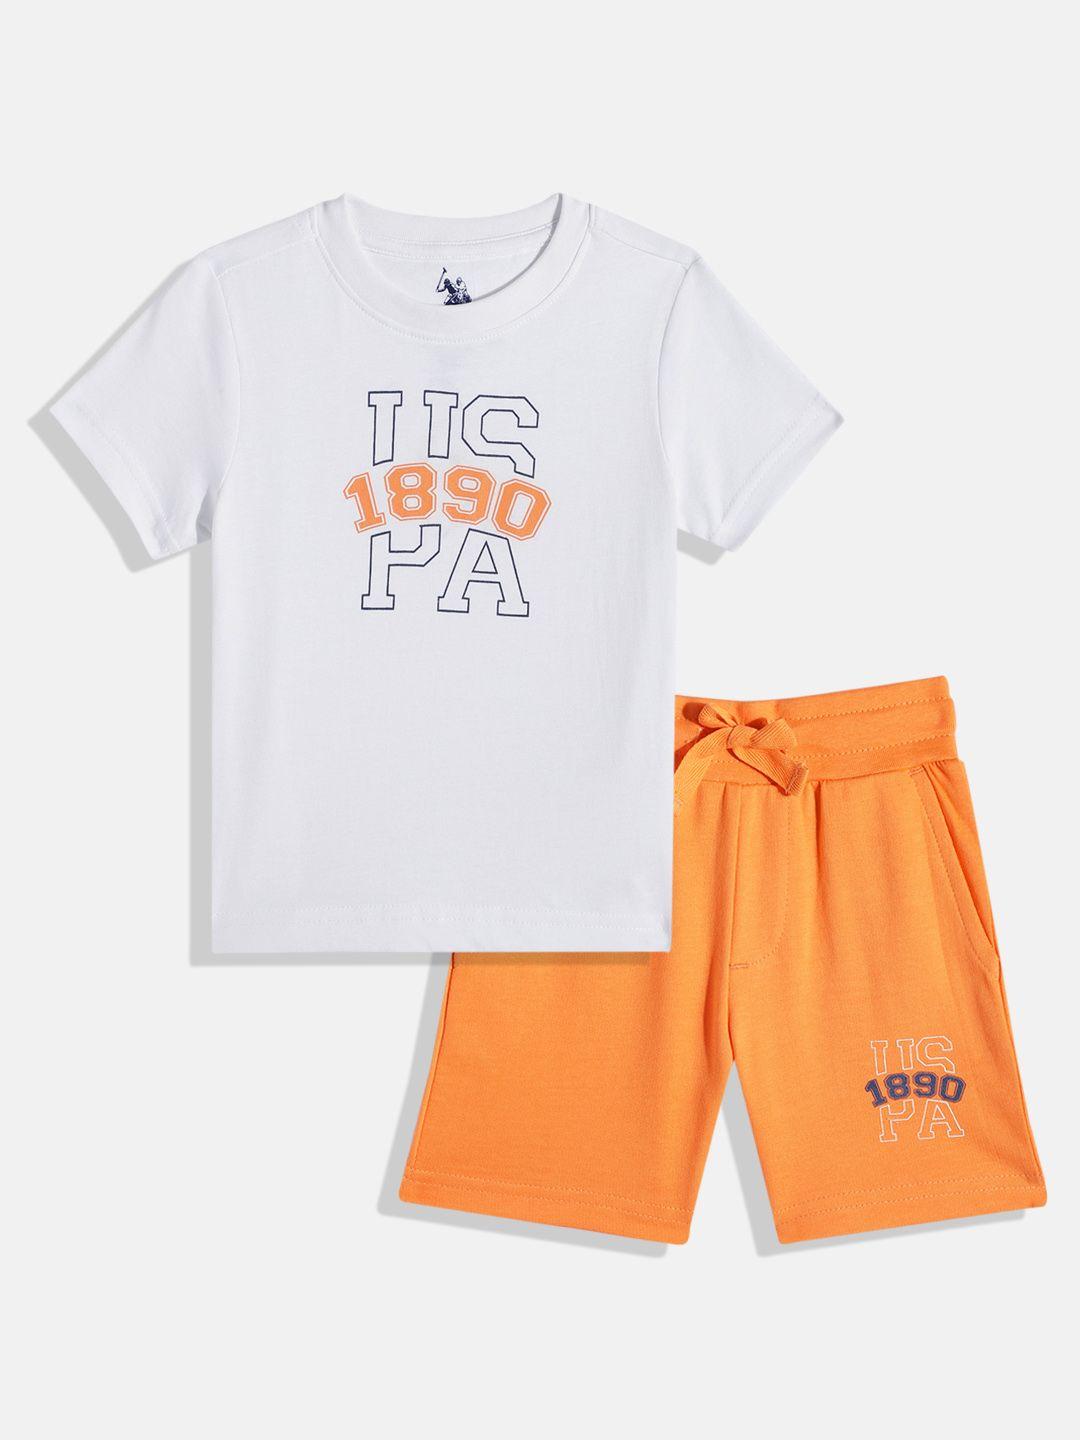 u.s.-polo-assn.-kids-boys-brand-logo-print-knitted-pure-cotton-t-shirt-with-shorts